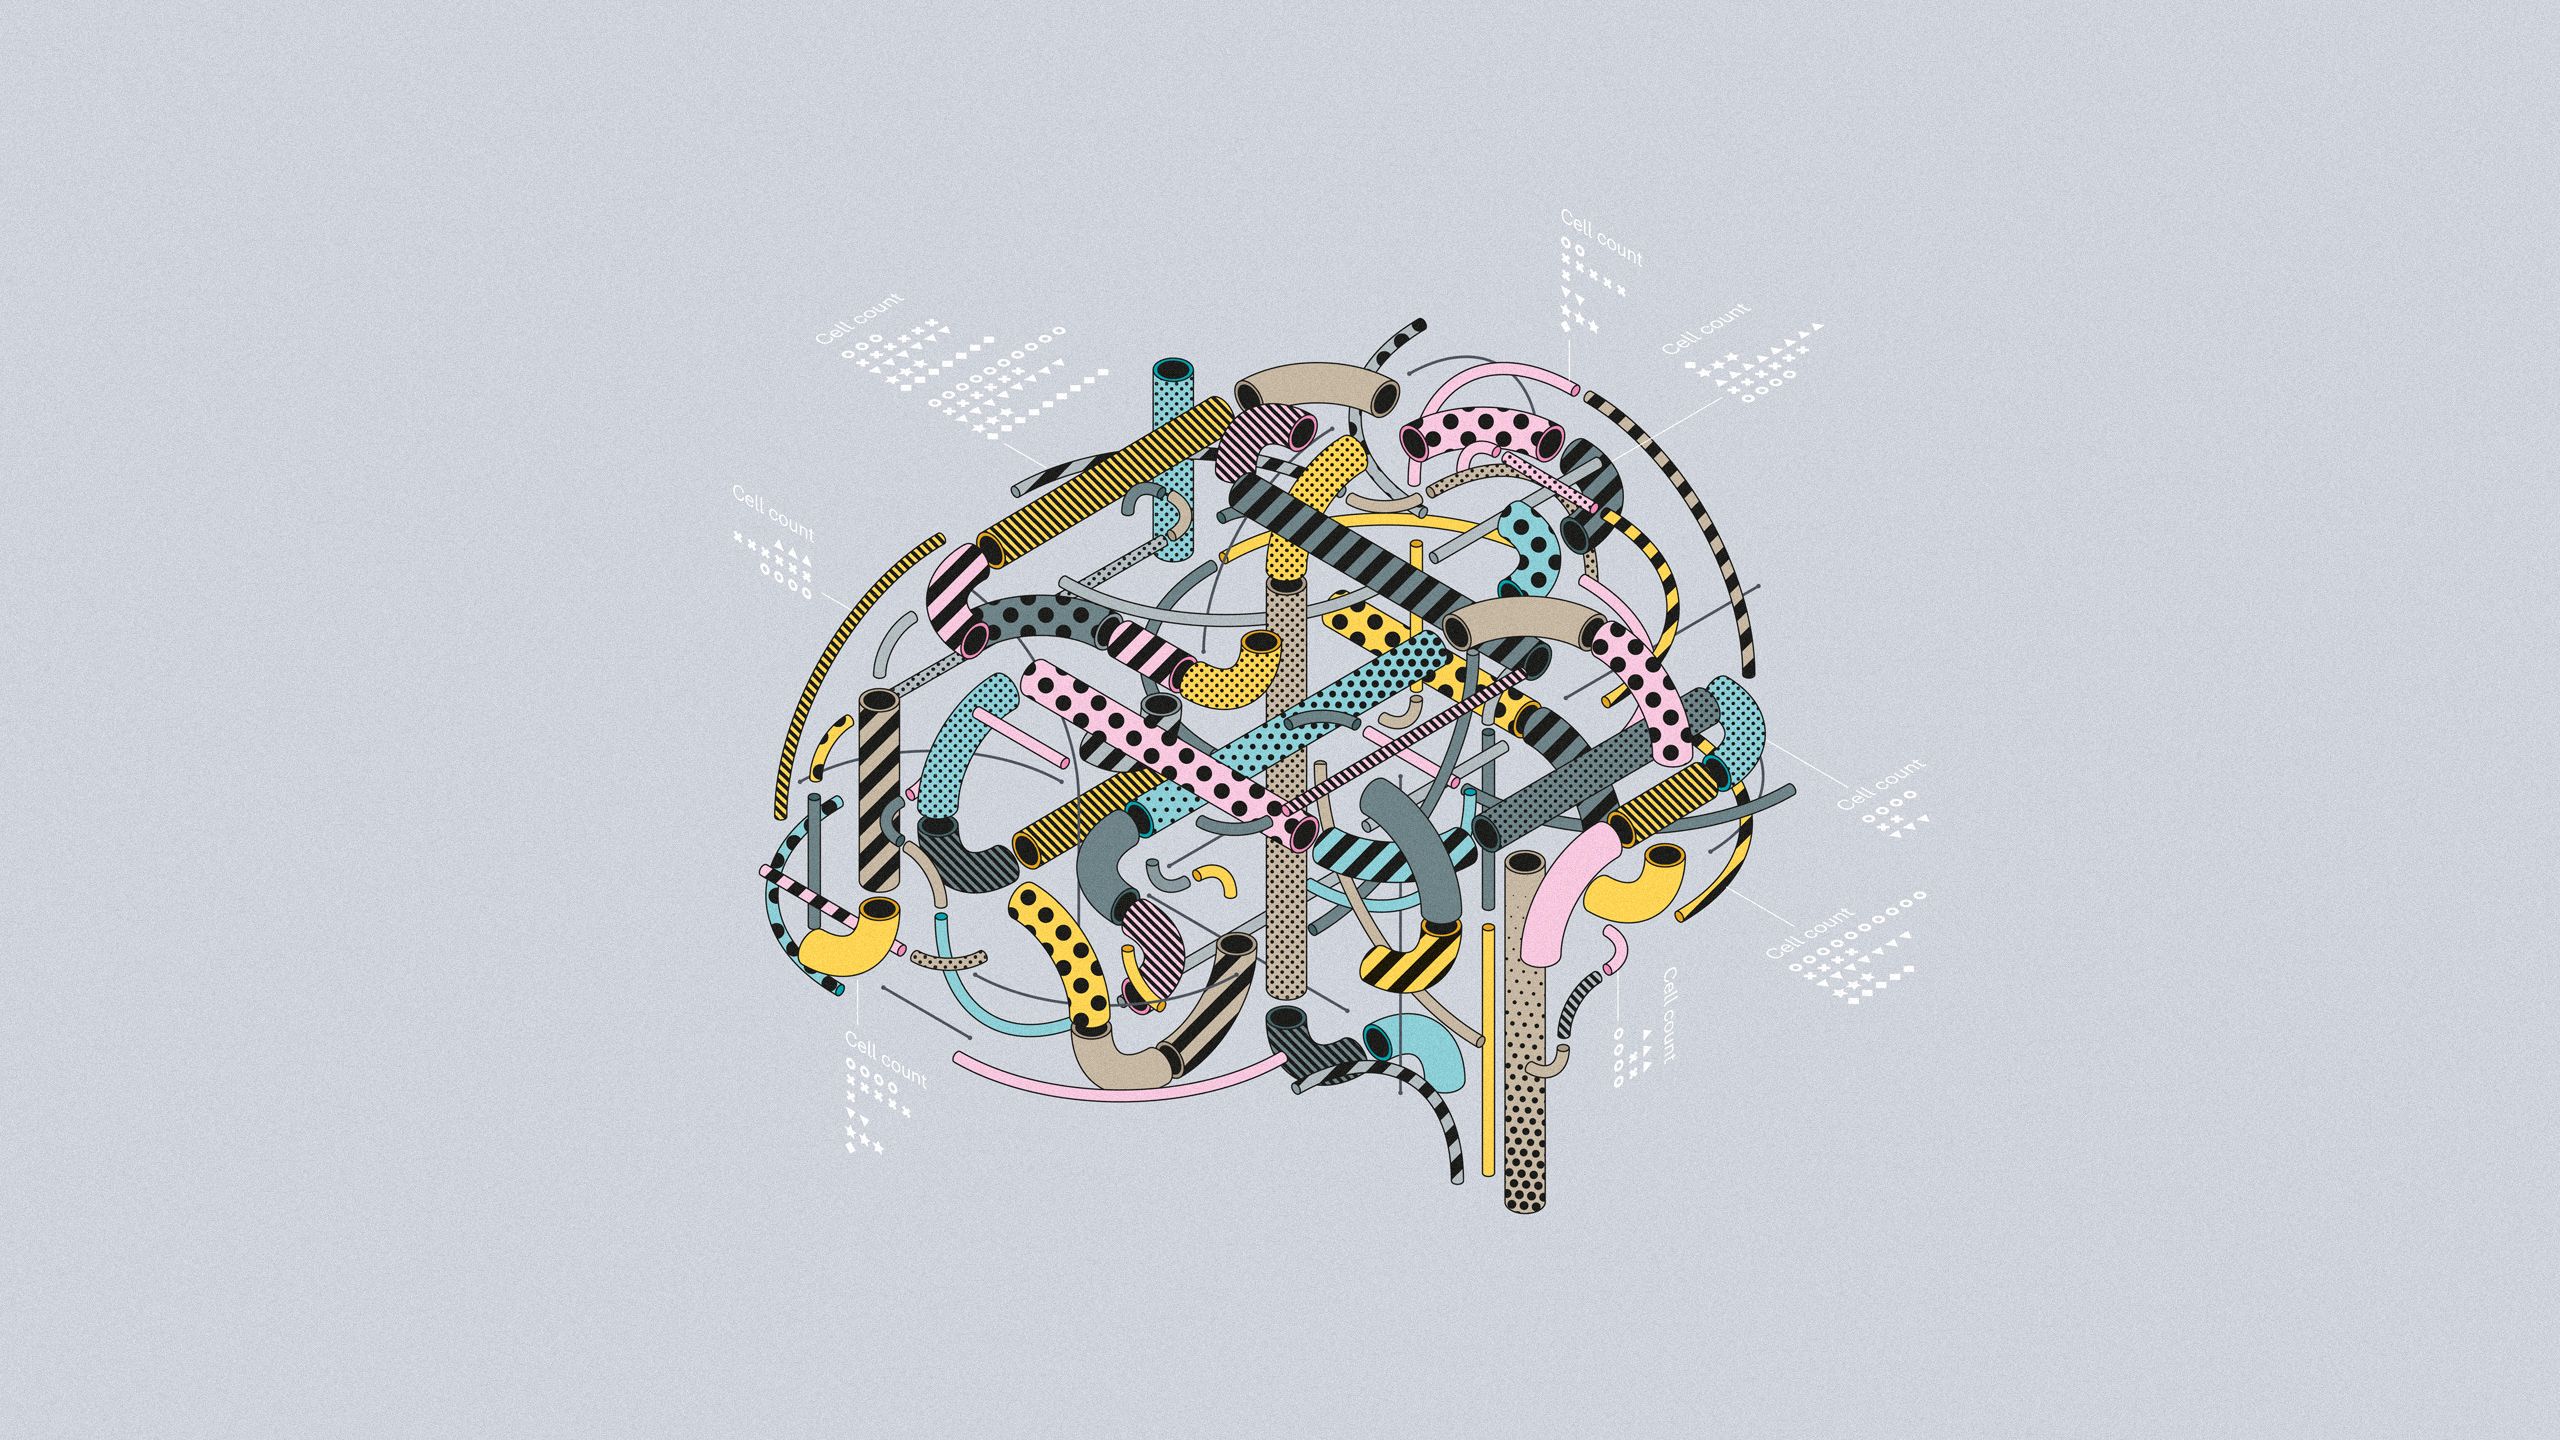 Stylised illustration of the human brain constructed from colourful pipes.